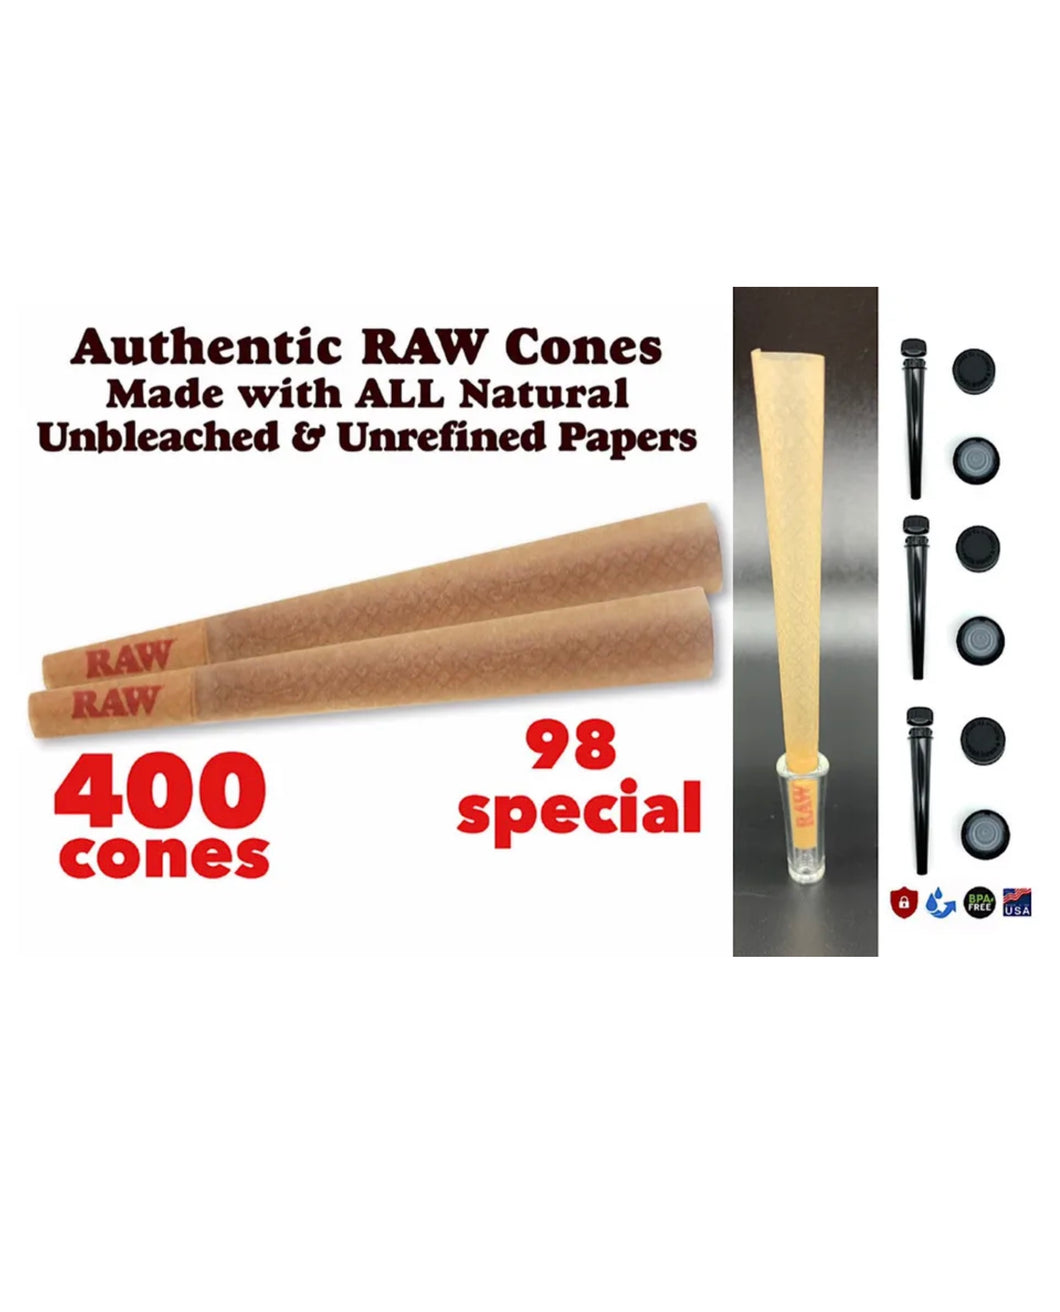 raw cone classic 98 special size pre rolled cone(400 pack)+3pcs tube +glass TIP